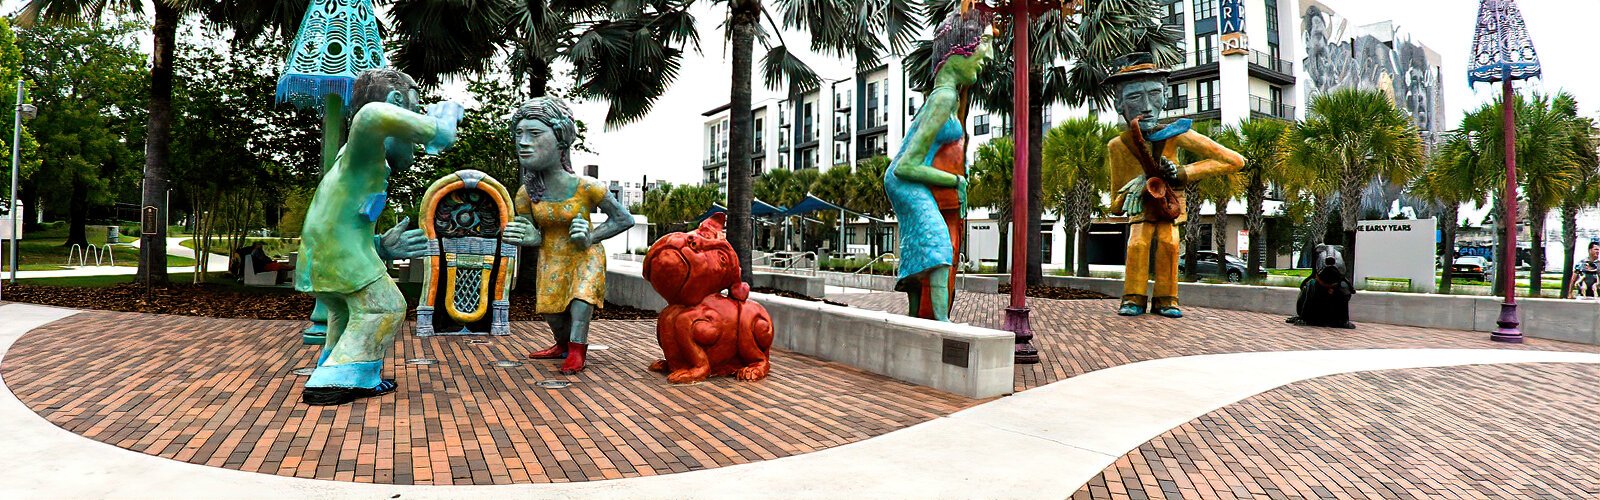  Welcoming visitors to Perry Harvey, Sr. Park, James Simon’s sculptures of musicians, dancers, and a jukebox highlight the importance of music to the culture of the historic Central Avenue Business District.